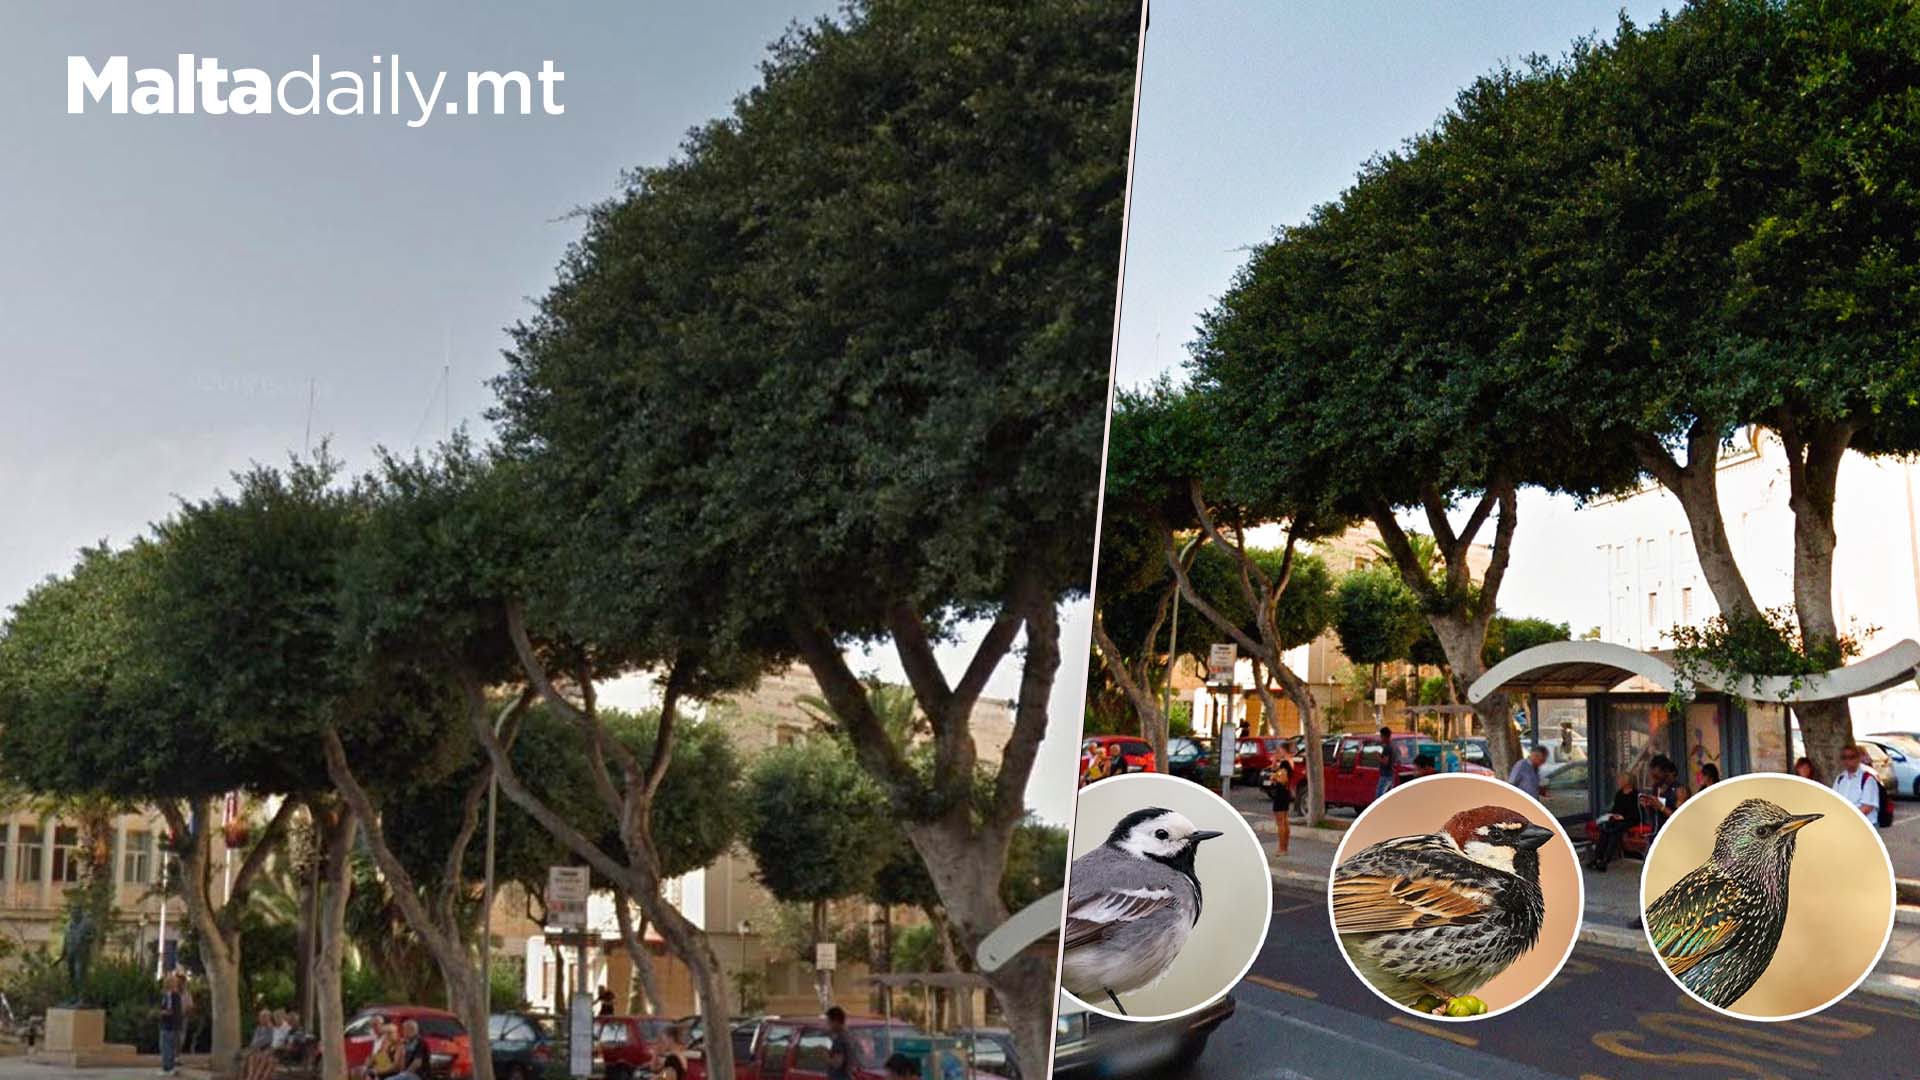 Activists Call Out Destruction Of Ficus Trees In Mosta Square